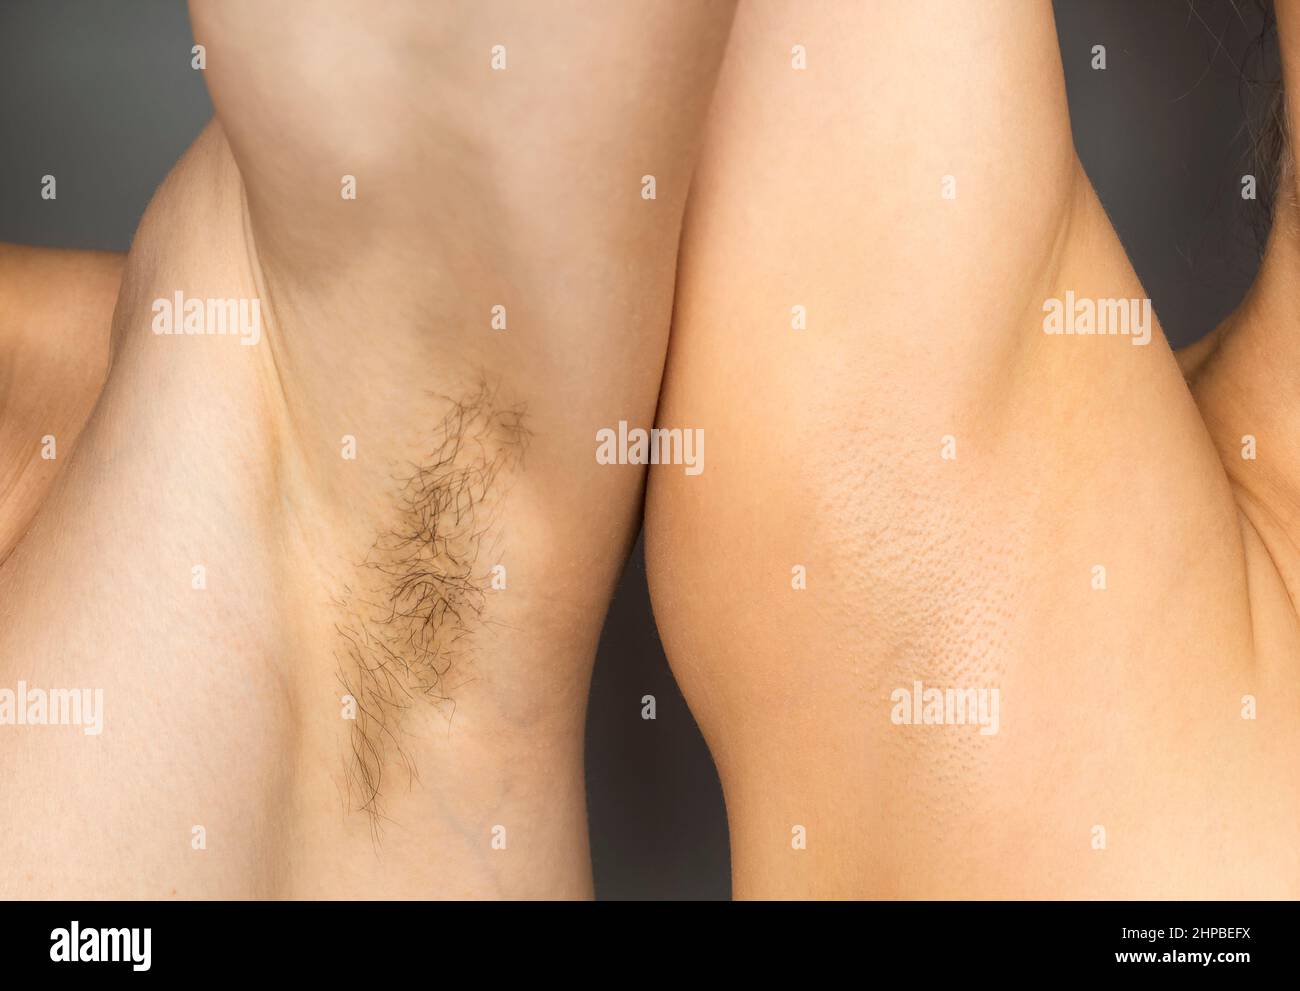 Two armpits with and without hair. Laser hair removal concept. Stock Photo